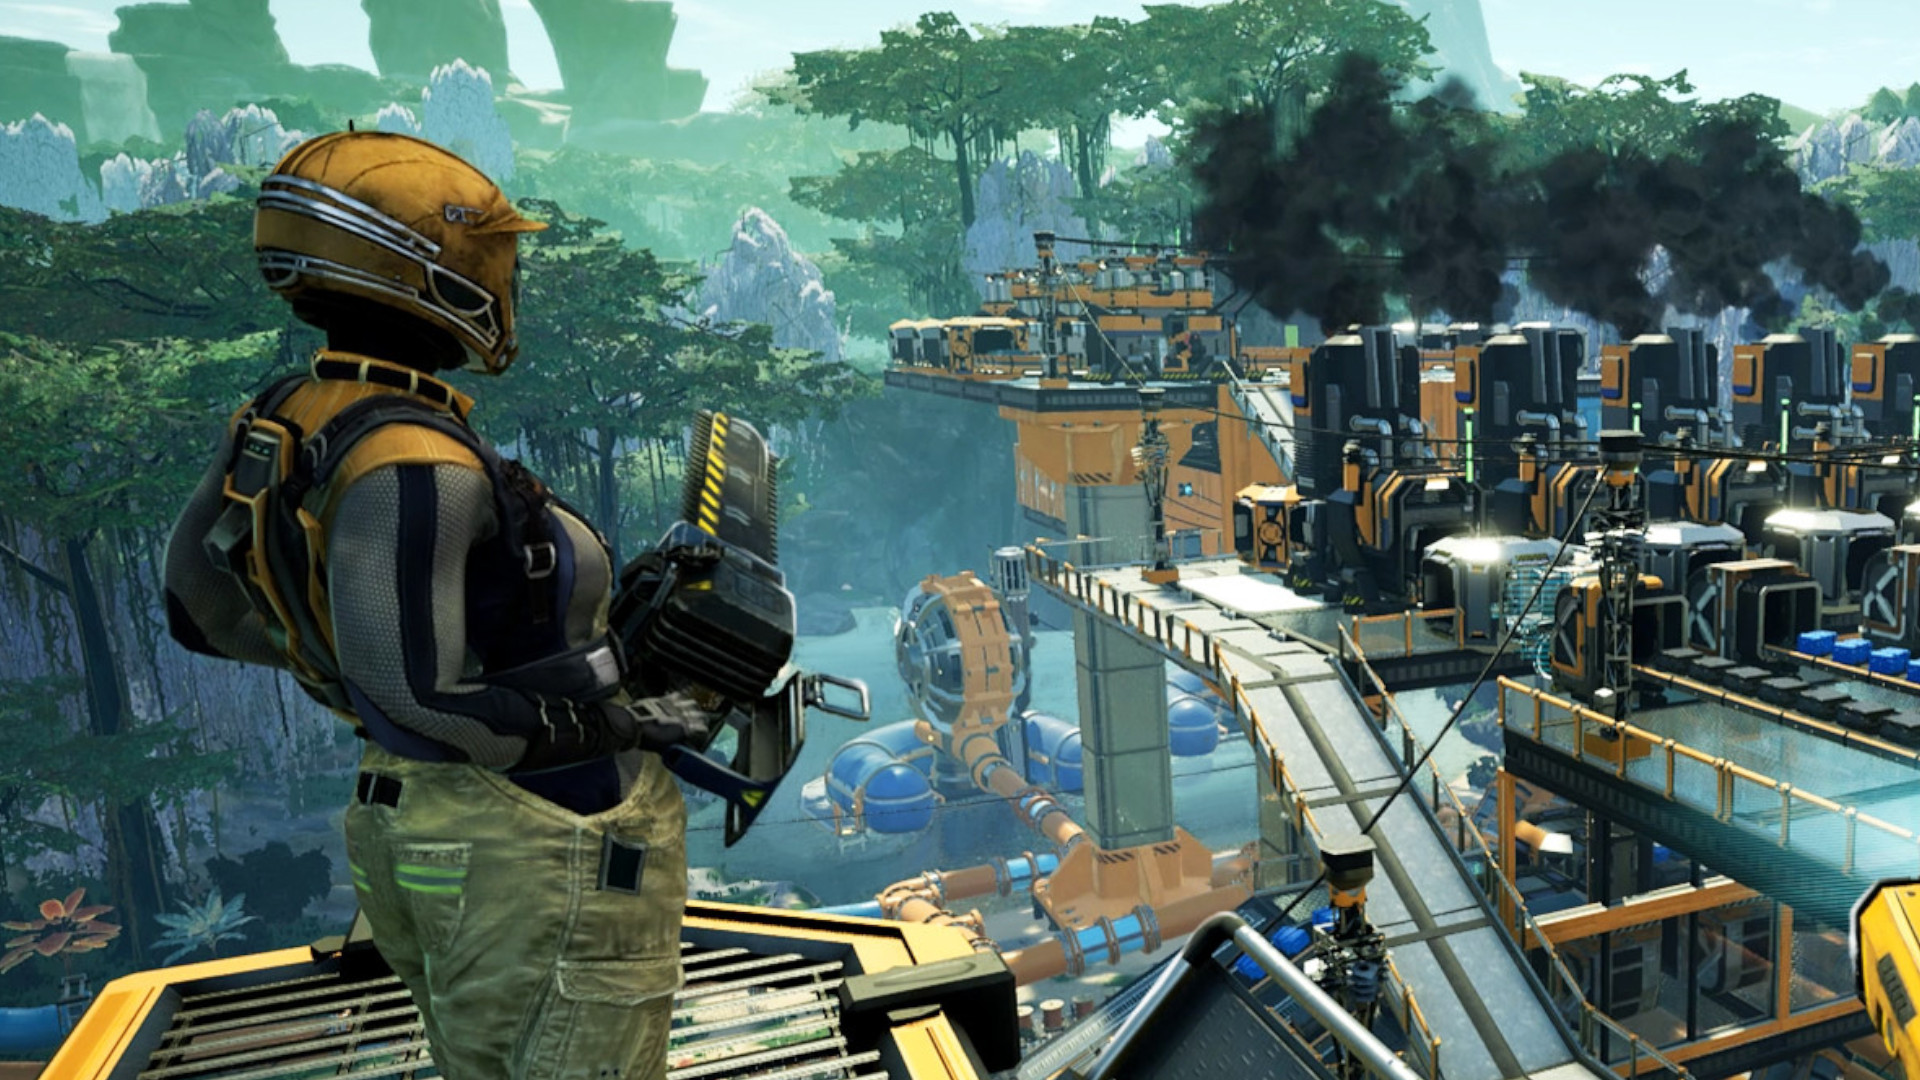 Satisfactory enters a “new phase of production” toward 1.0 | PCGamesN